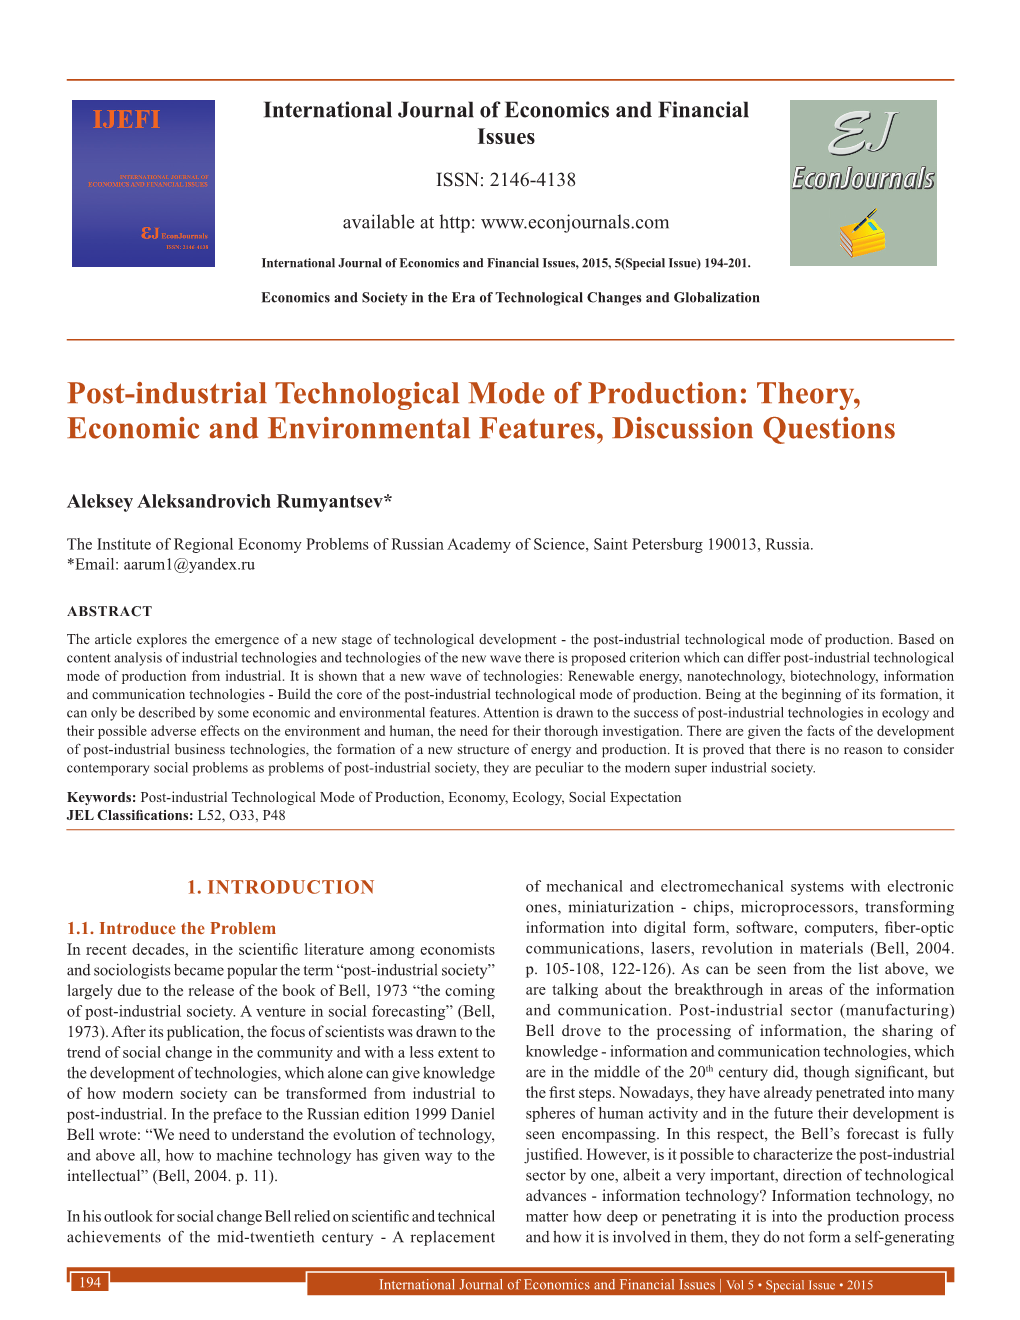 Post-Industrial Technological Mode of Production: Theory, Economic and Environmental Features, Discussion Questions